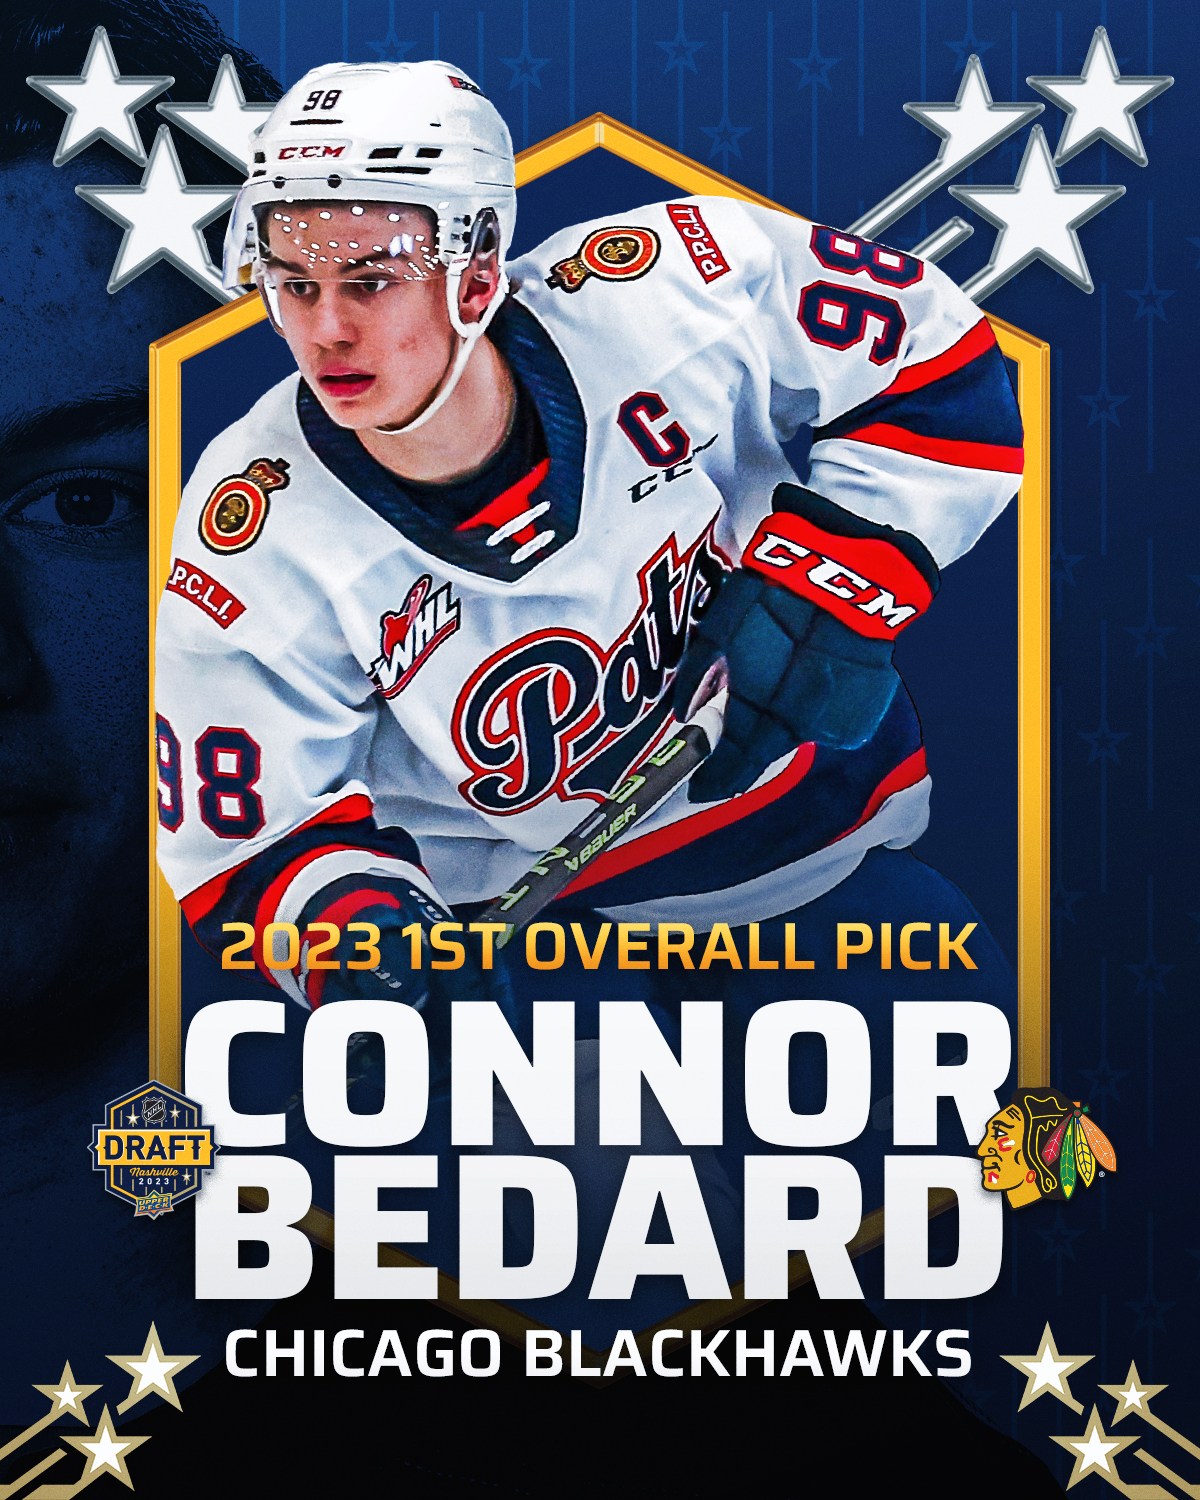 NHL draft: Chicago Blackhawks select Connor Bedard first overall